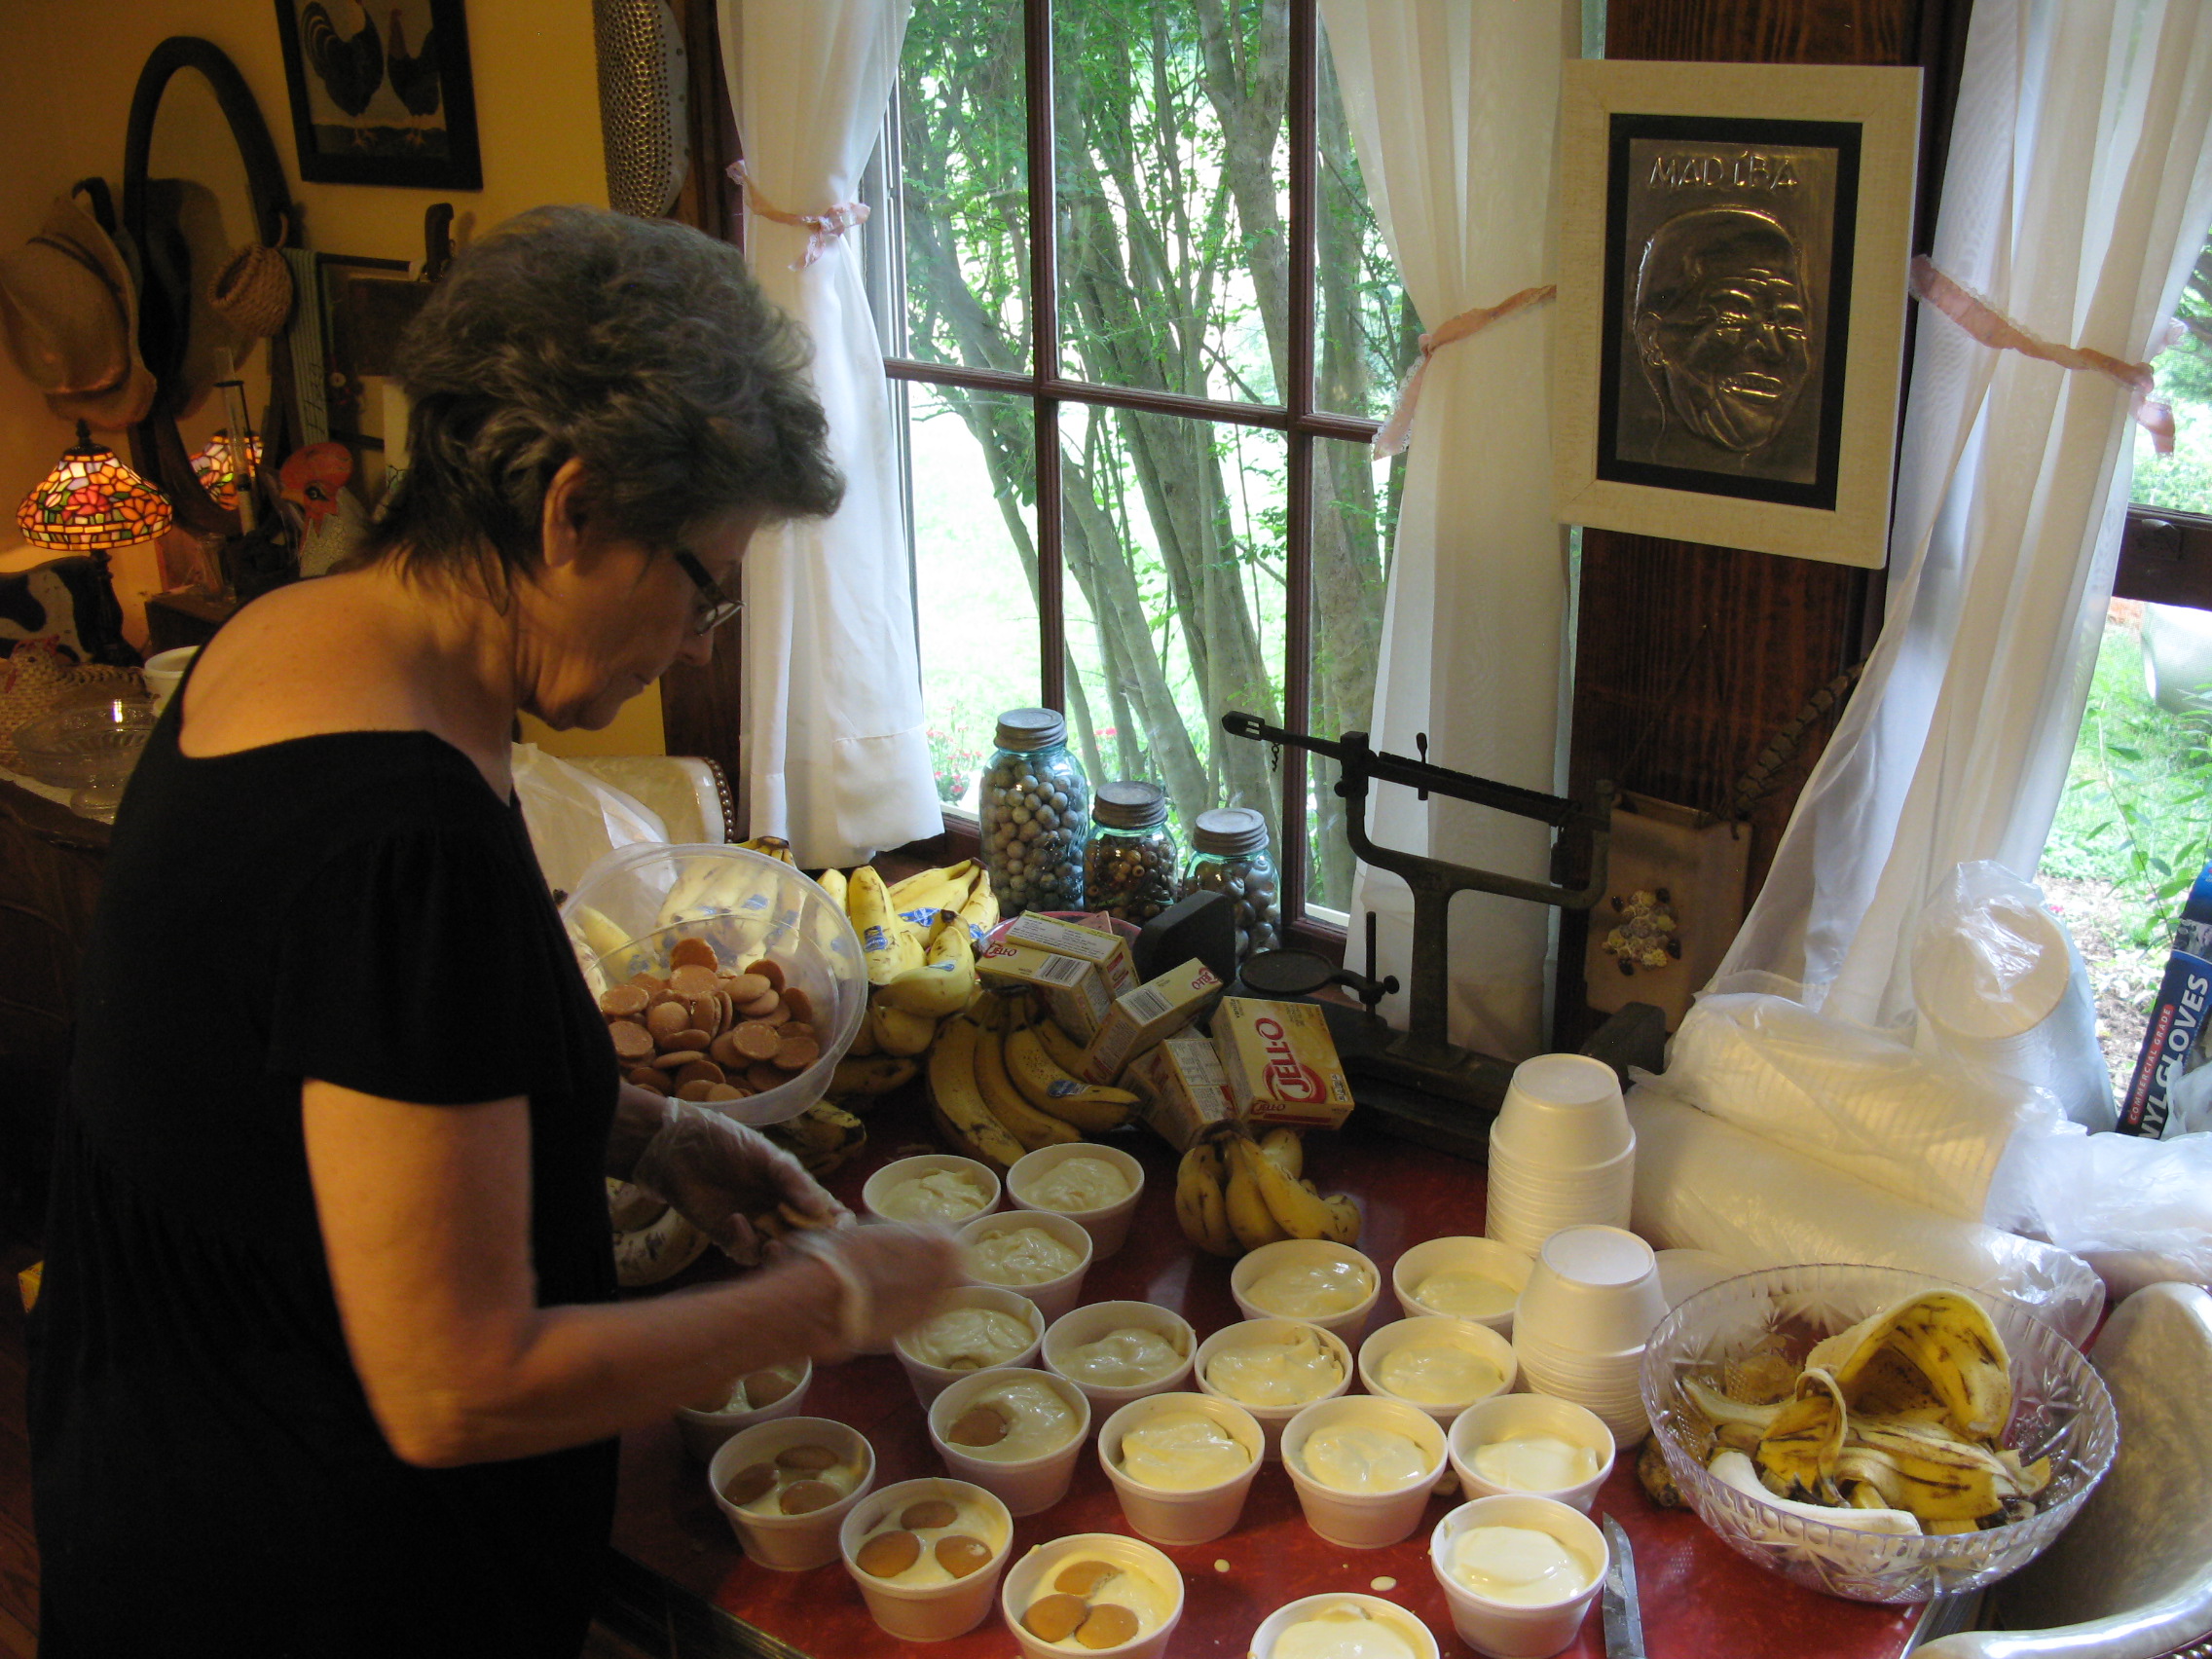 Pat placing vanilla wafers on top of the mini-puddings before putting the lids on. The relief on the wall of Nelson Mandela prompted Pat to tell the story of the time she heard him speak in Georgia in 1990. Friday, June 12, 2015. Leanne E. Smith. 